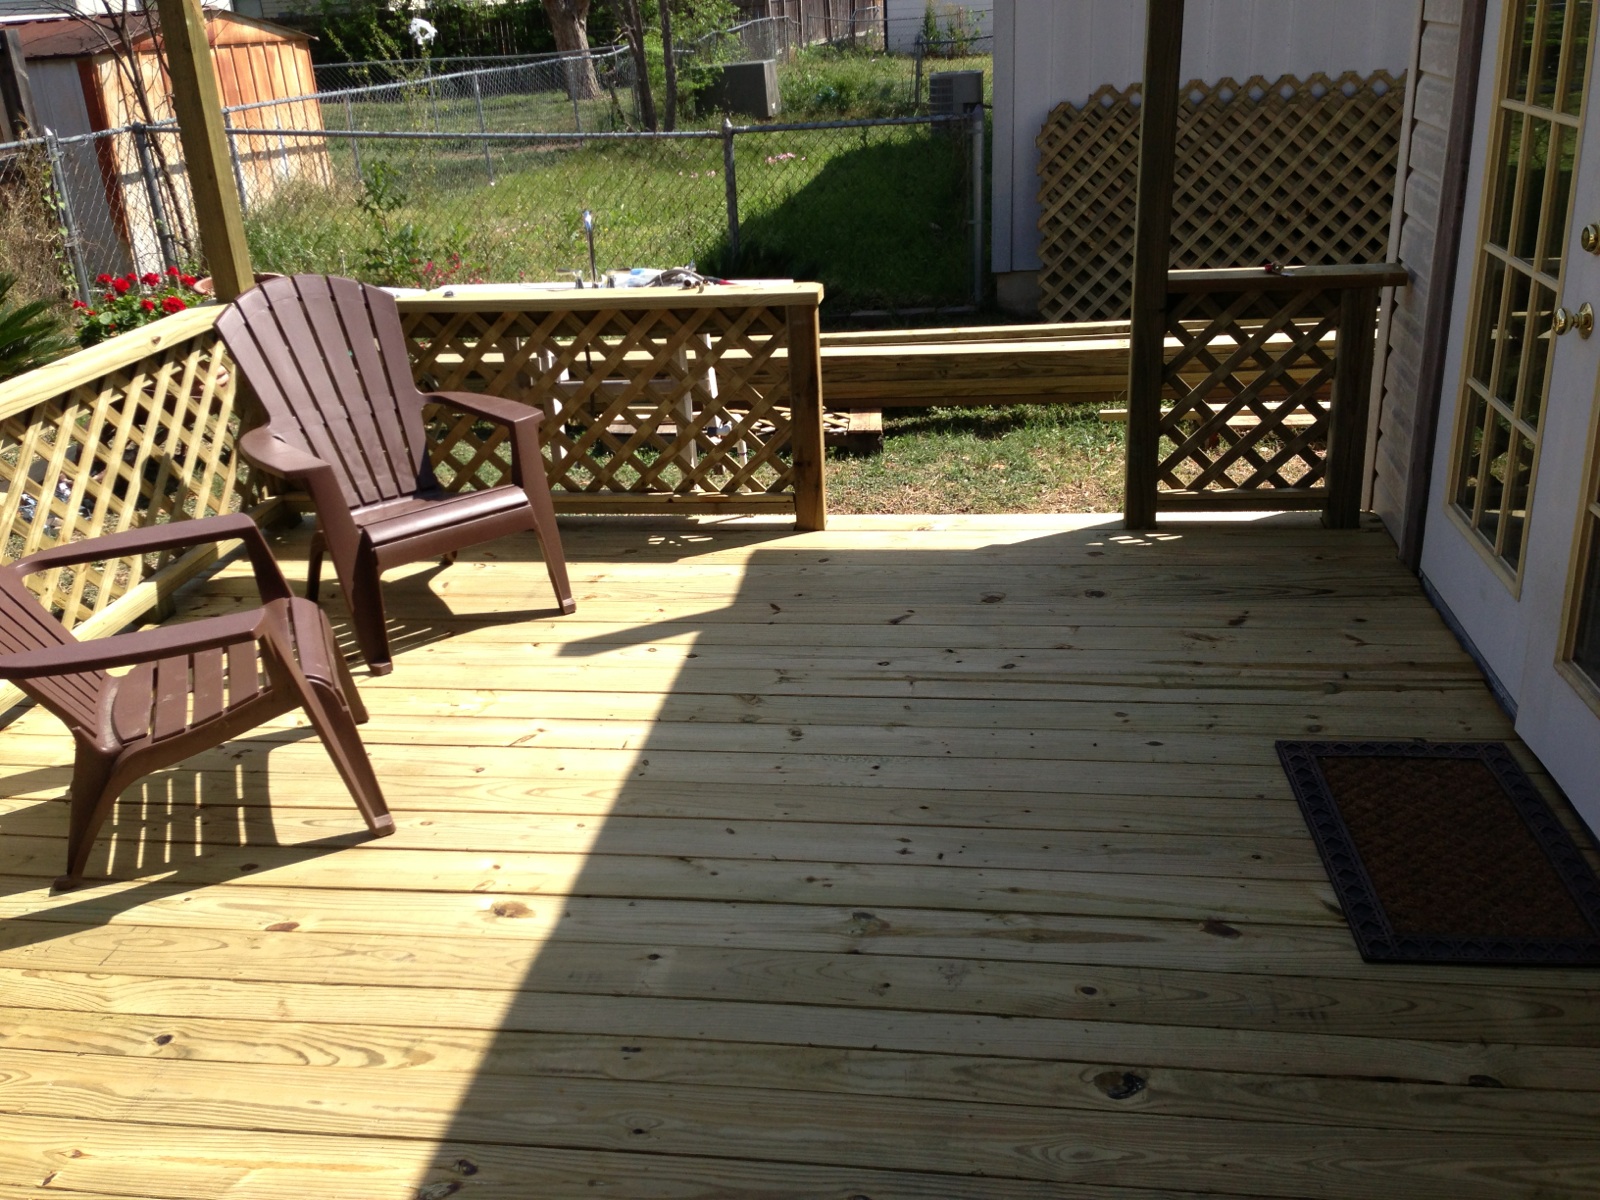 The Unfinished deck on its way to Completion